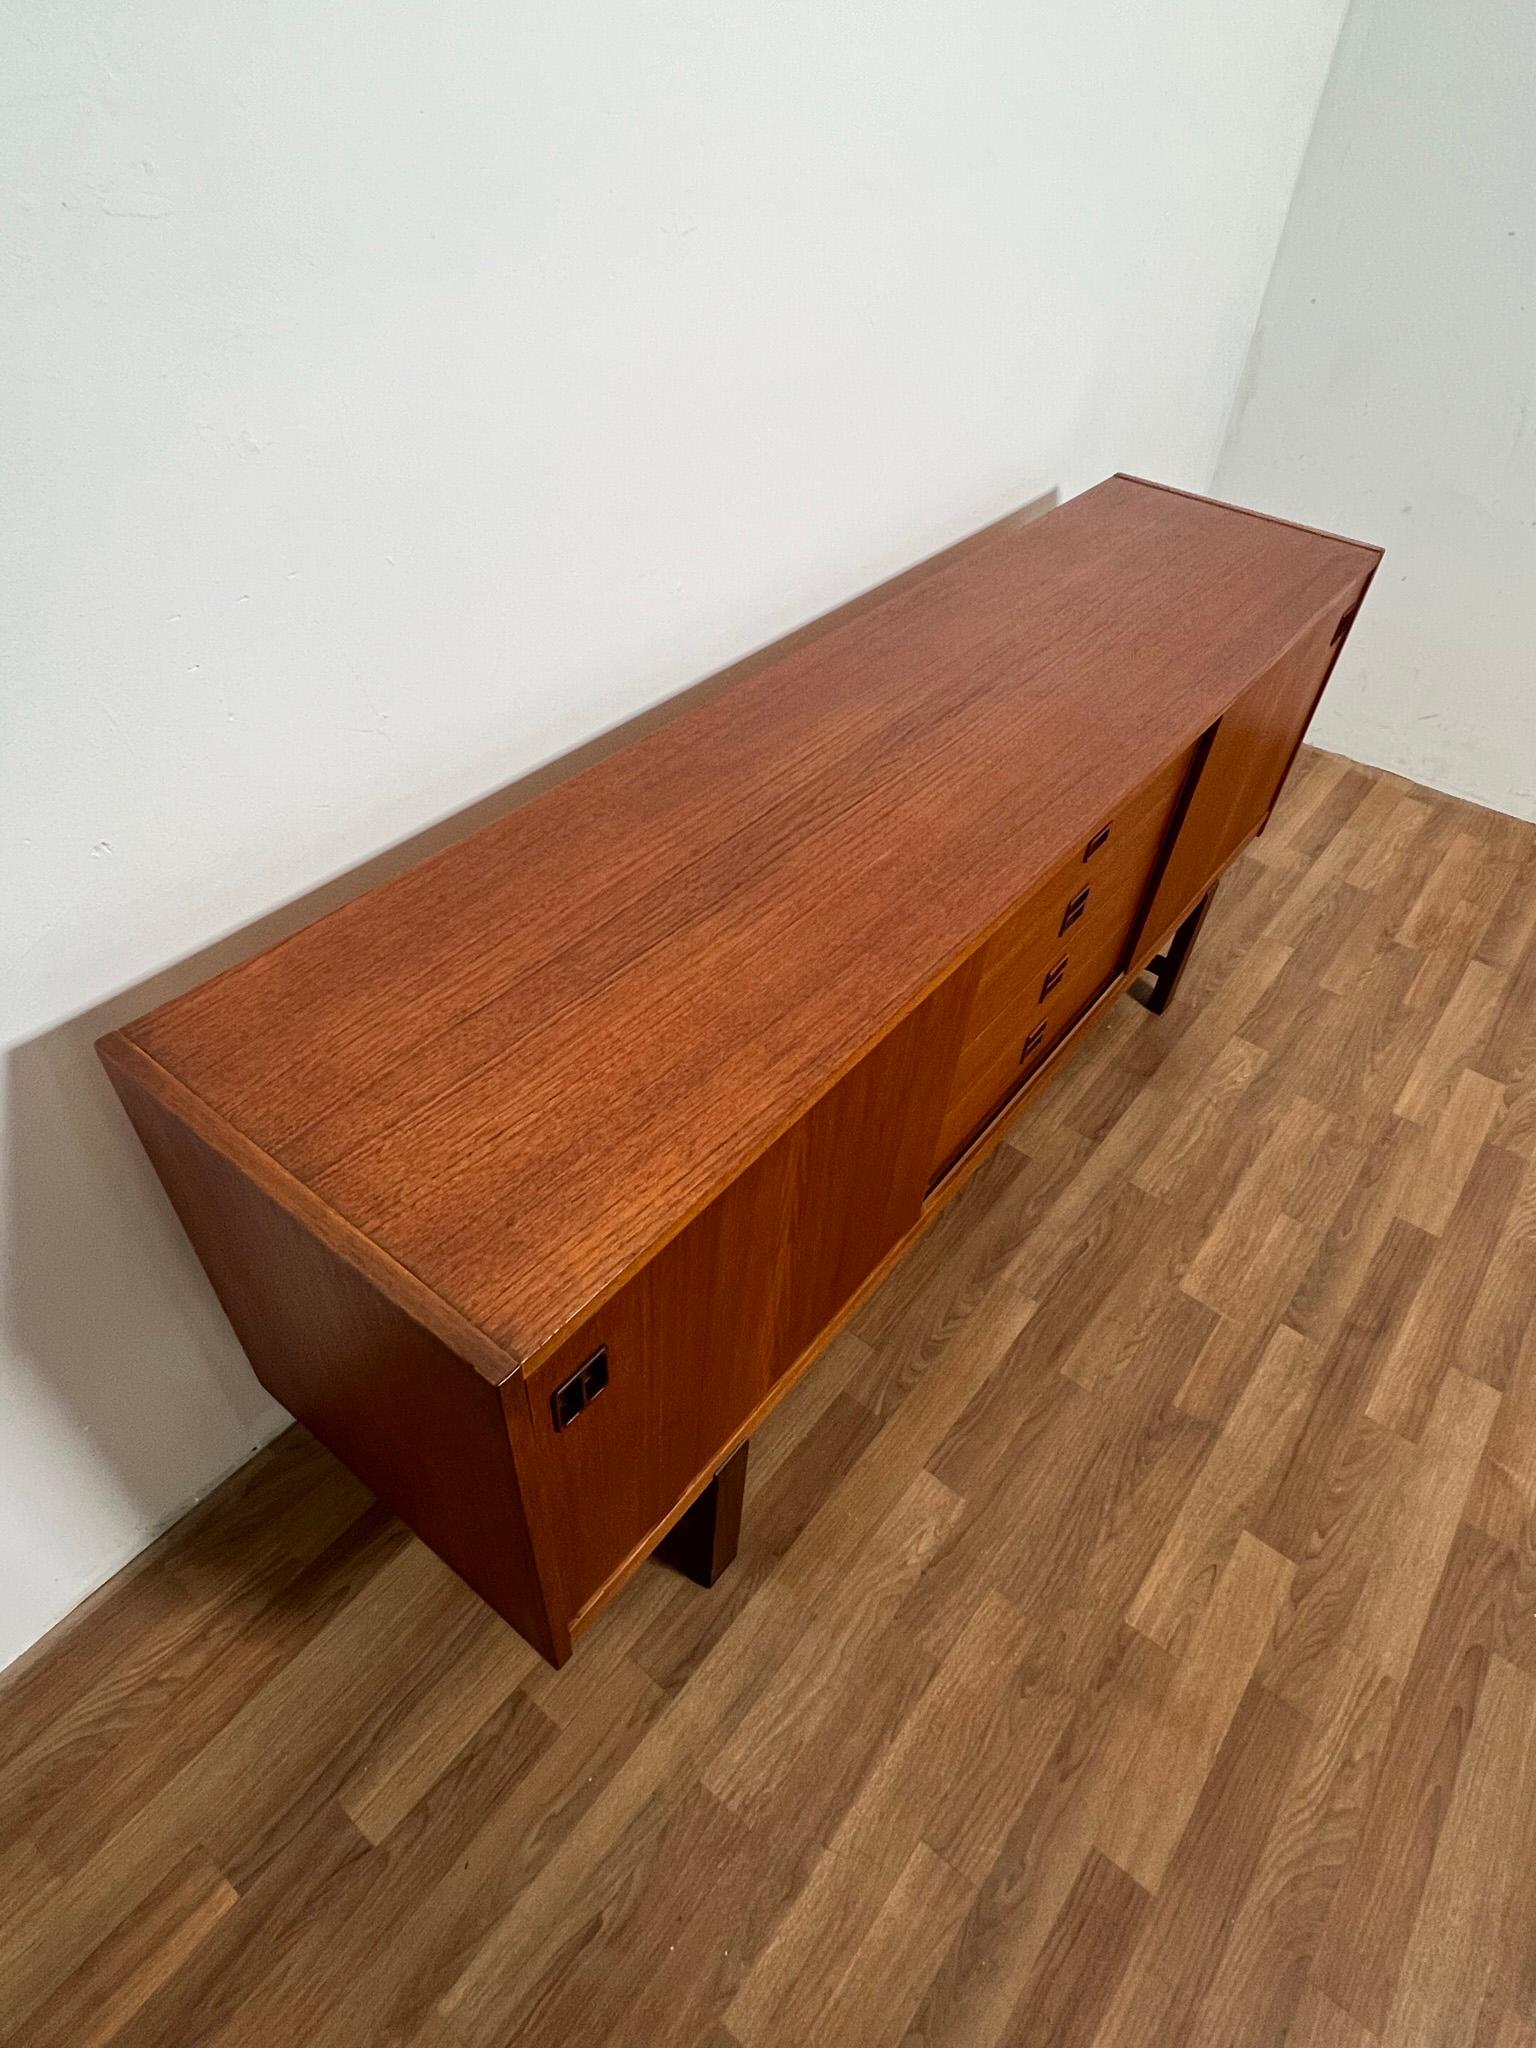 Swedish Teak Sideboard by Erik Worts, Circa 1960s In Good Condition For Sale In Peabody, MA